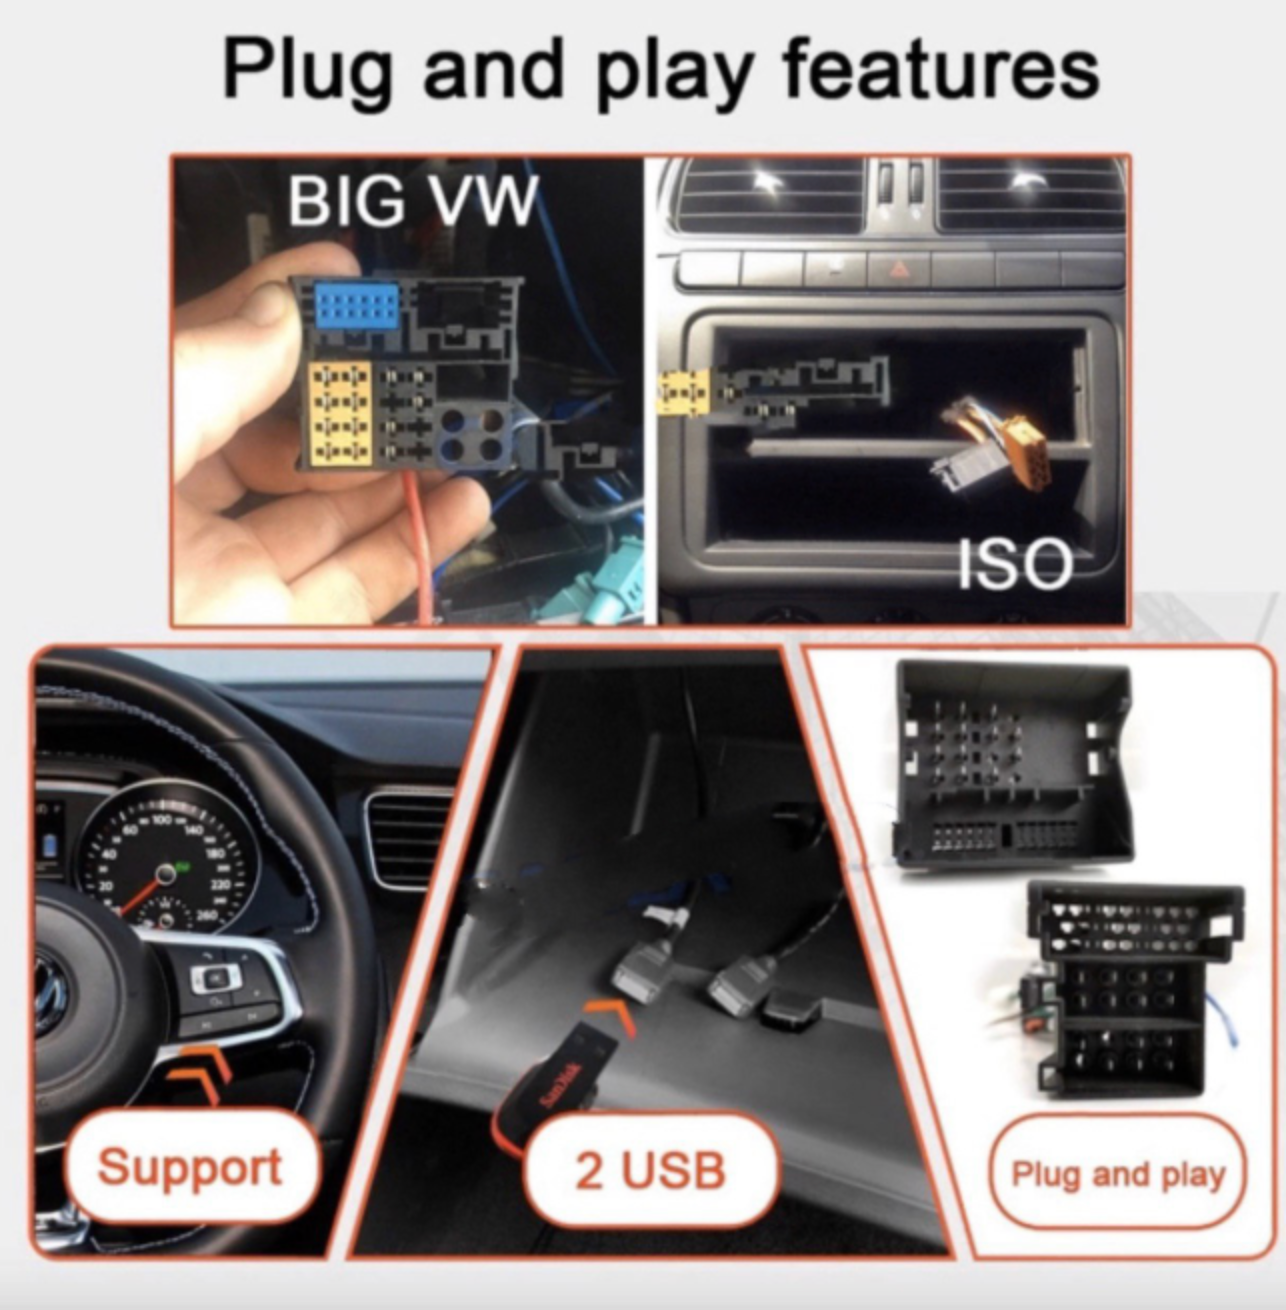 4G + 64G Suit For VW Android 10.0 Stereo Head Unit 9” Supports Apple CarPlay/ Android Auto + Reverse Camera suit for VW Golf 5 6 Skoda Passat